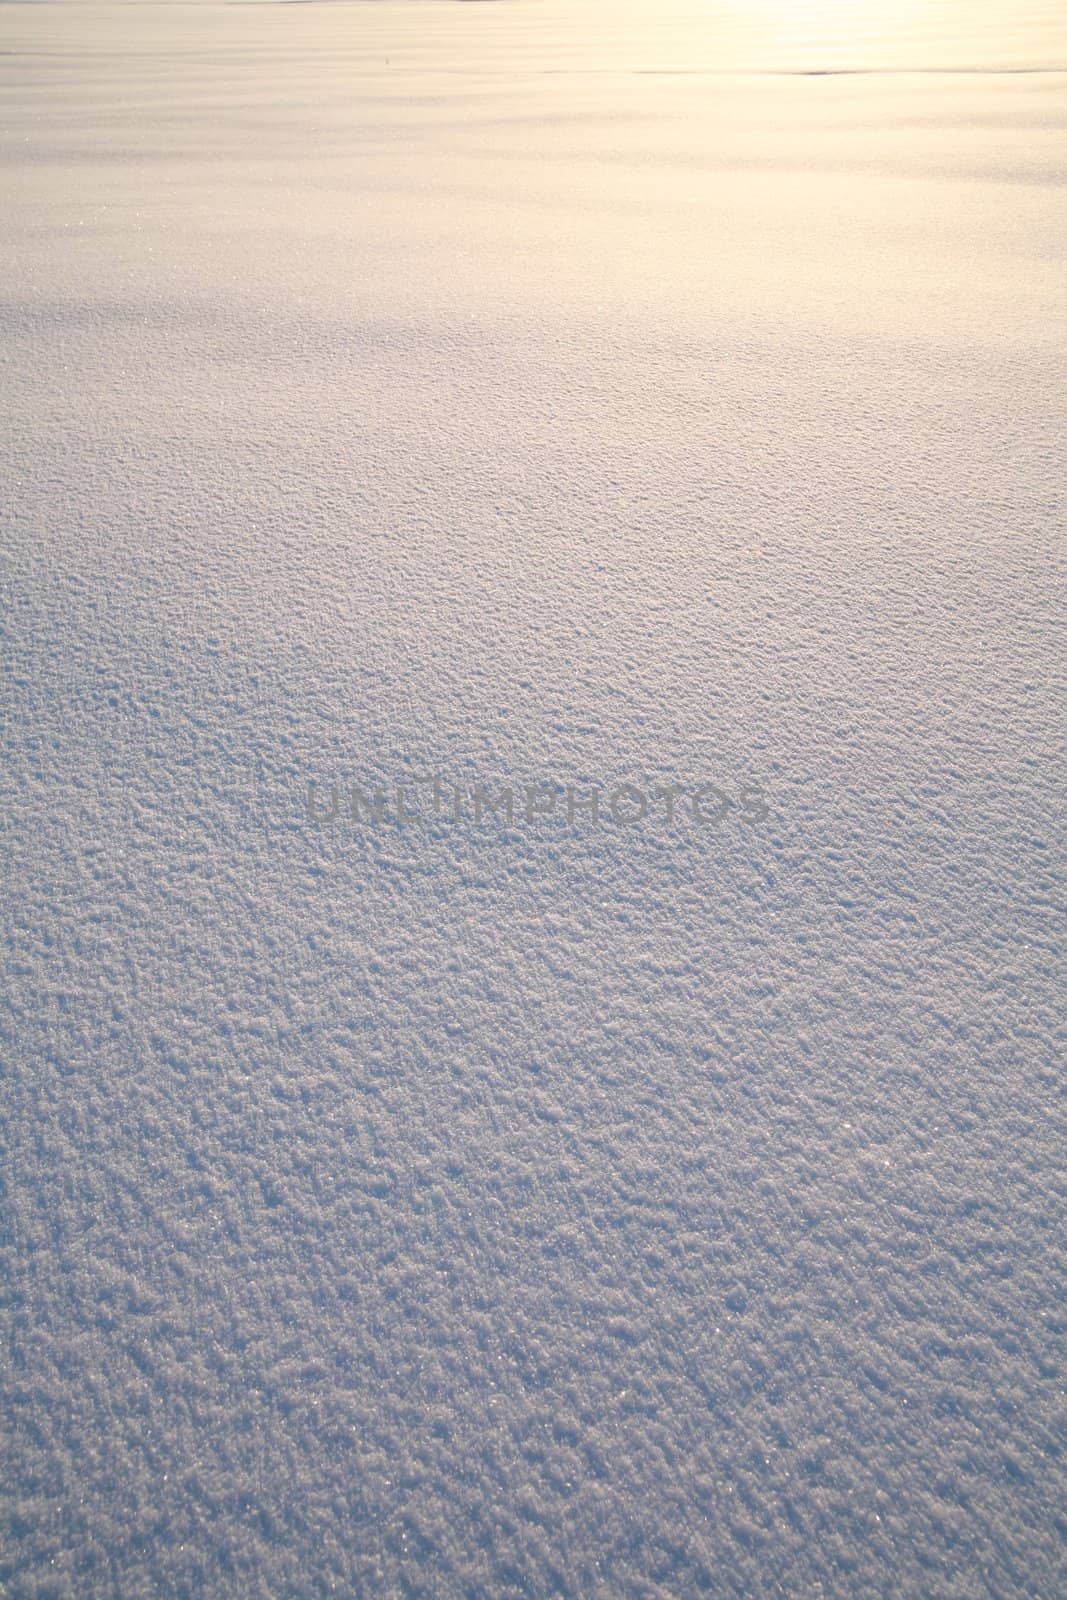 Details of a beautiful snow surface perfect for backgrounds on greeting cards etc.